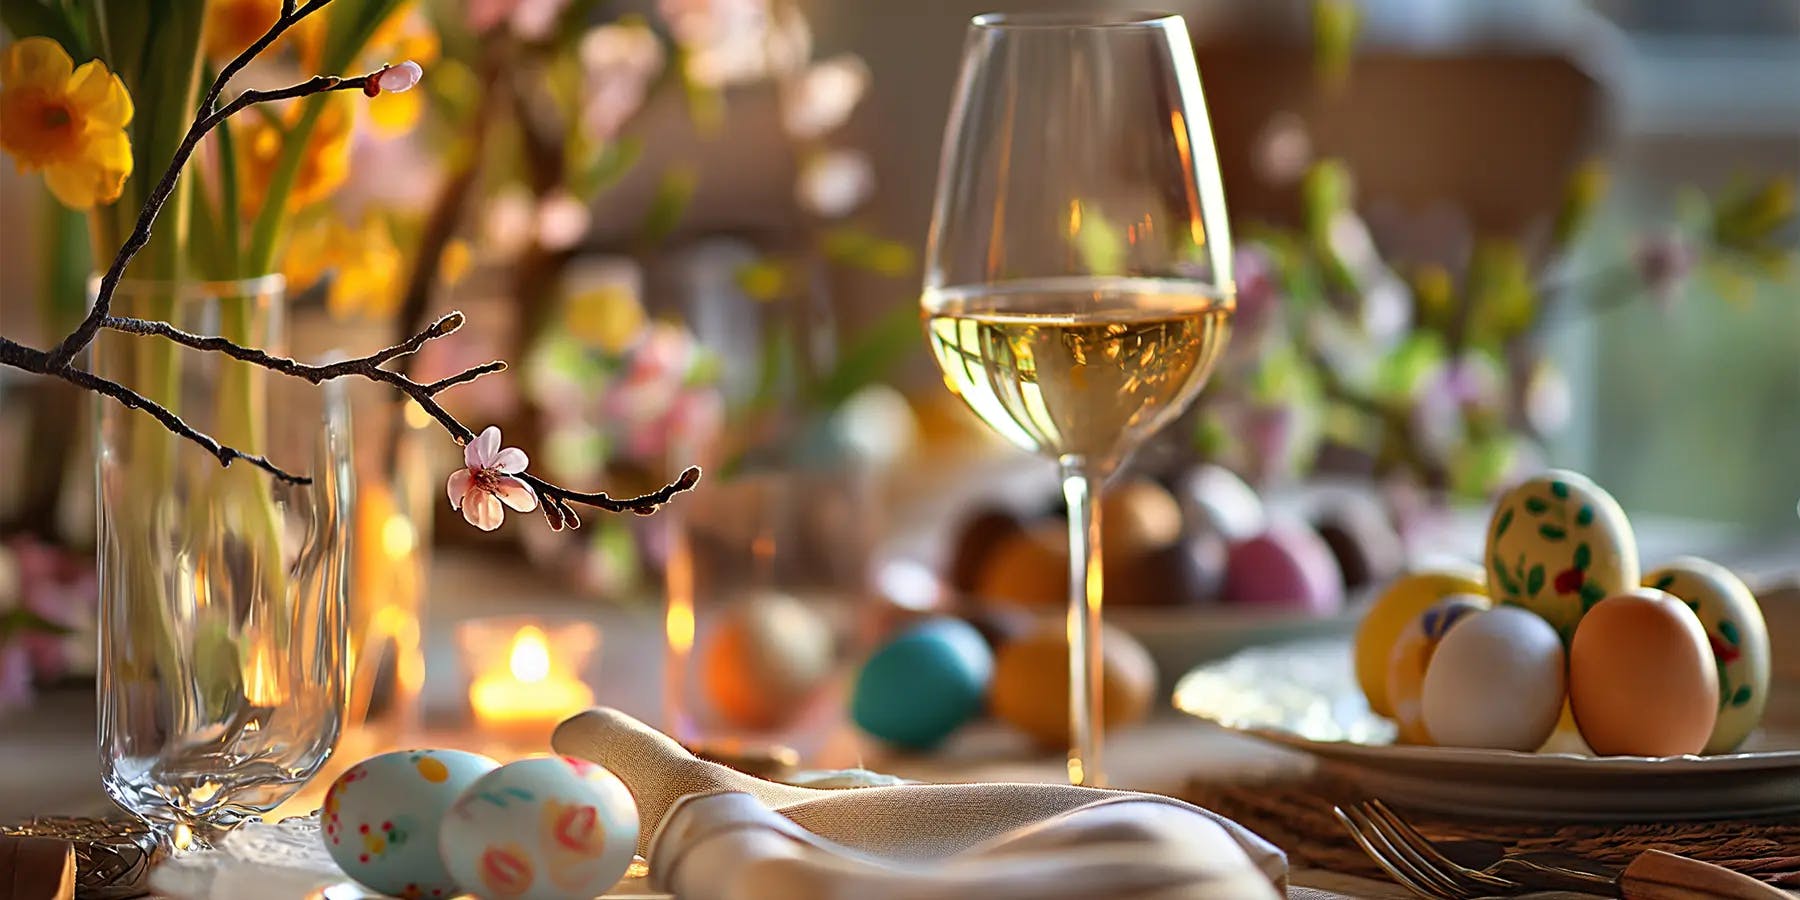 Glass of white wine, Easter table